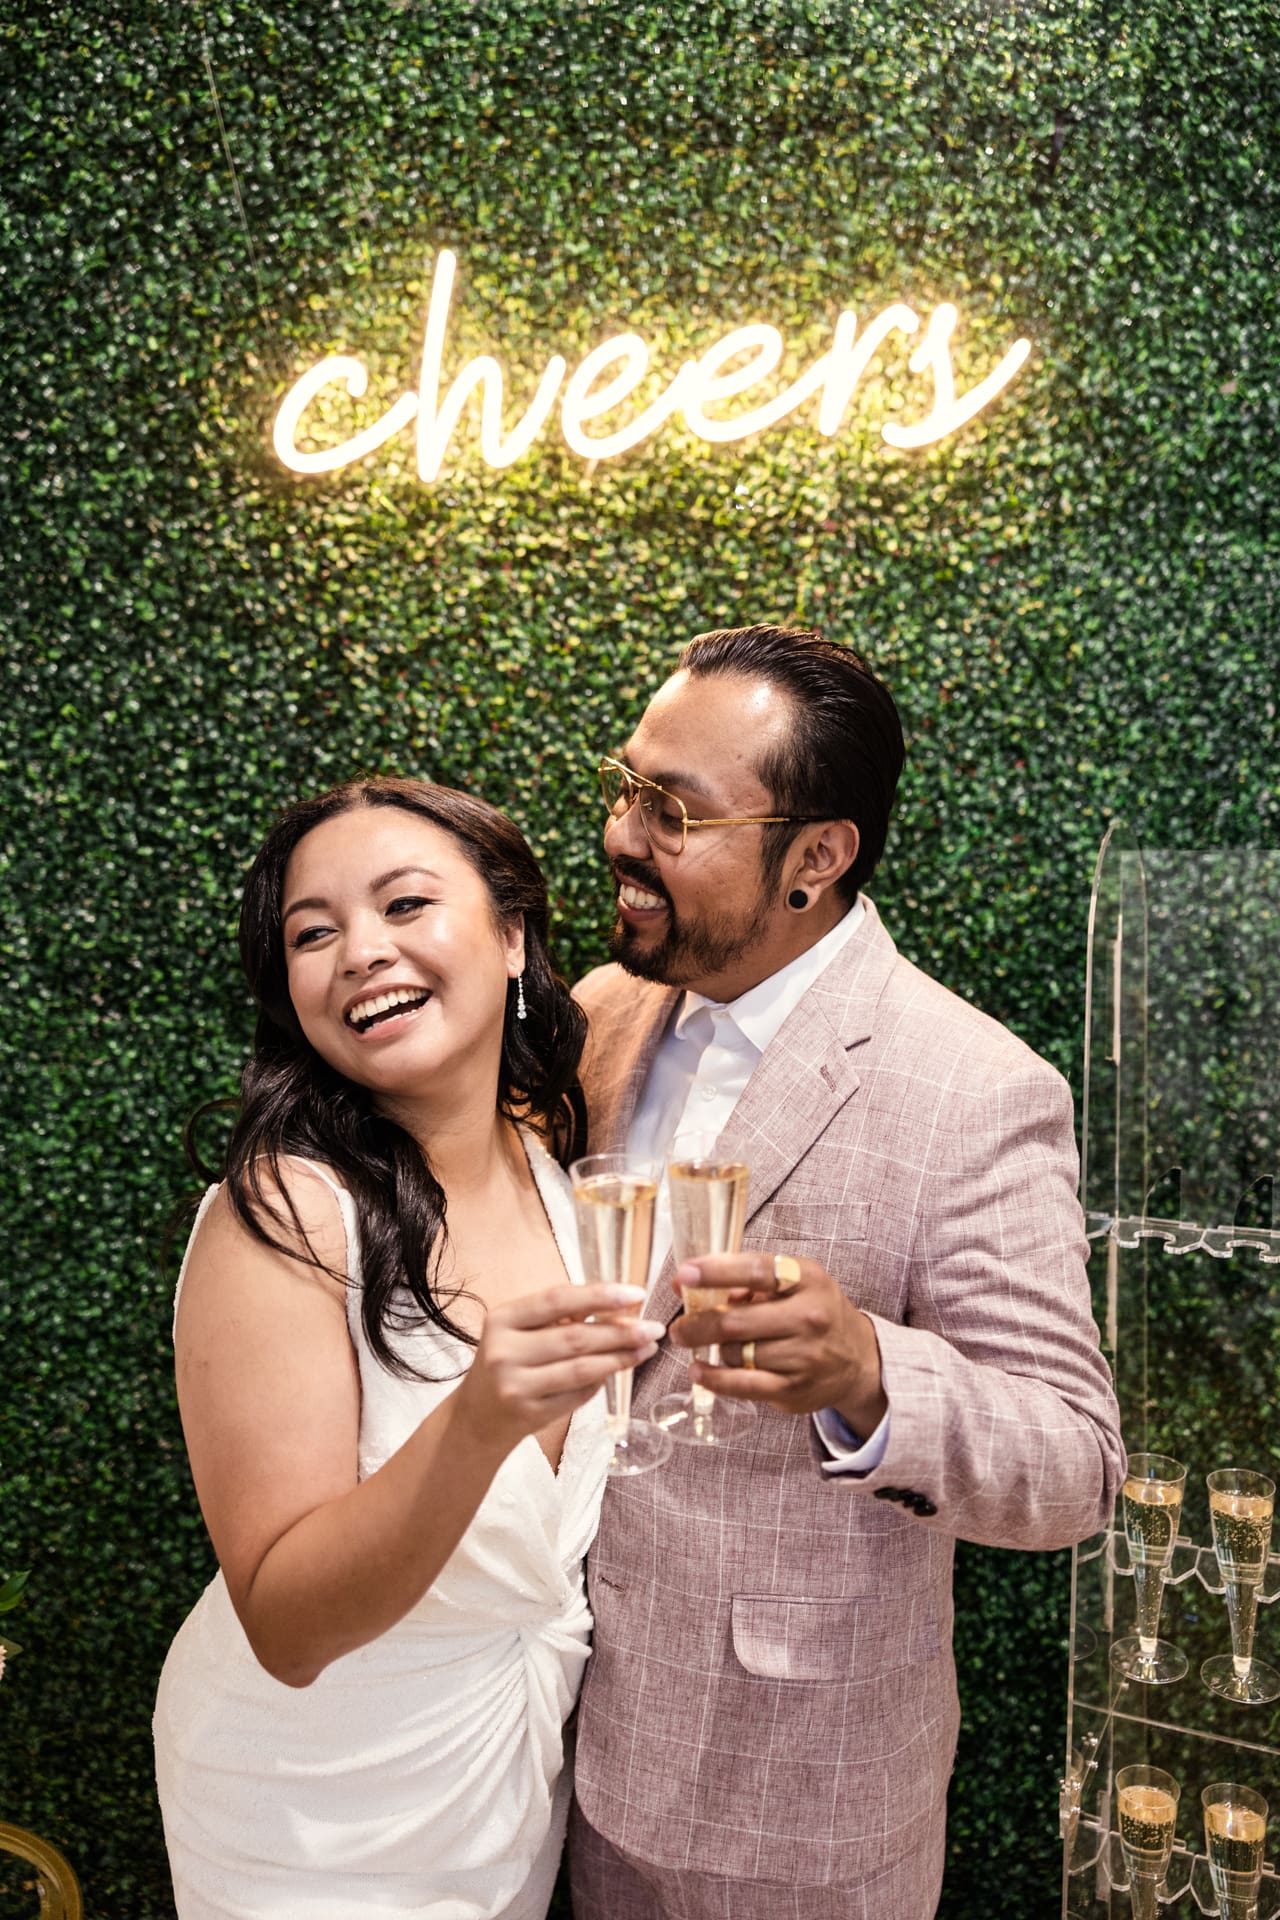 Just married bride and groom toast champagne in front of greenery wall with Cheers neon sign after their intimate wedding ceremony at P&M Studio Chicago event space in West Town